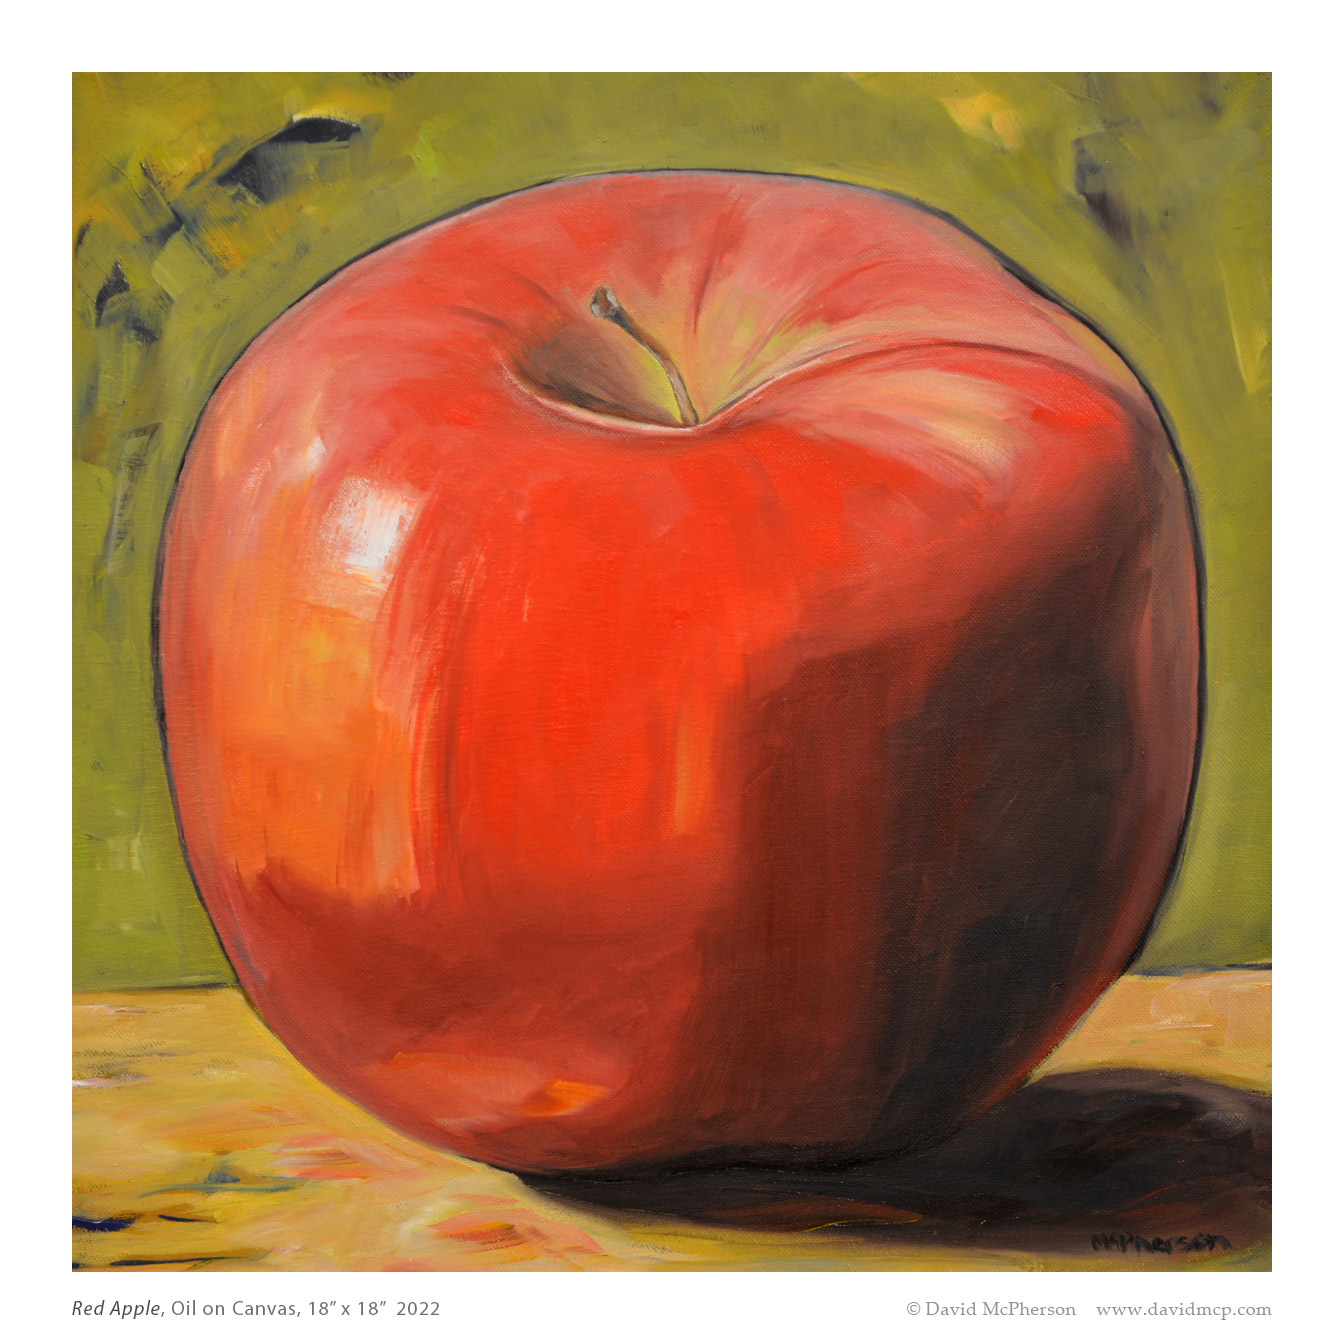 Red Apple, Oil on Canvas, 18 x 18, 2022